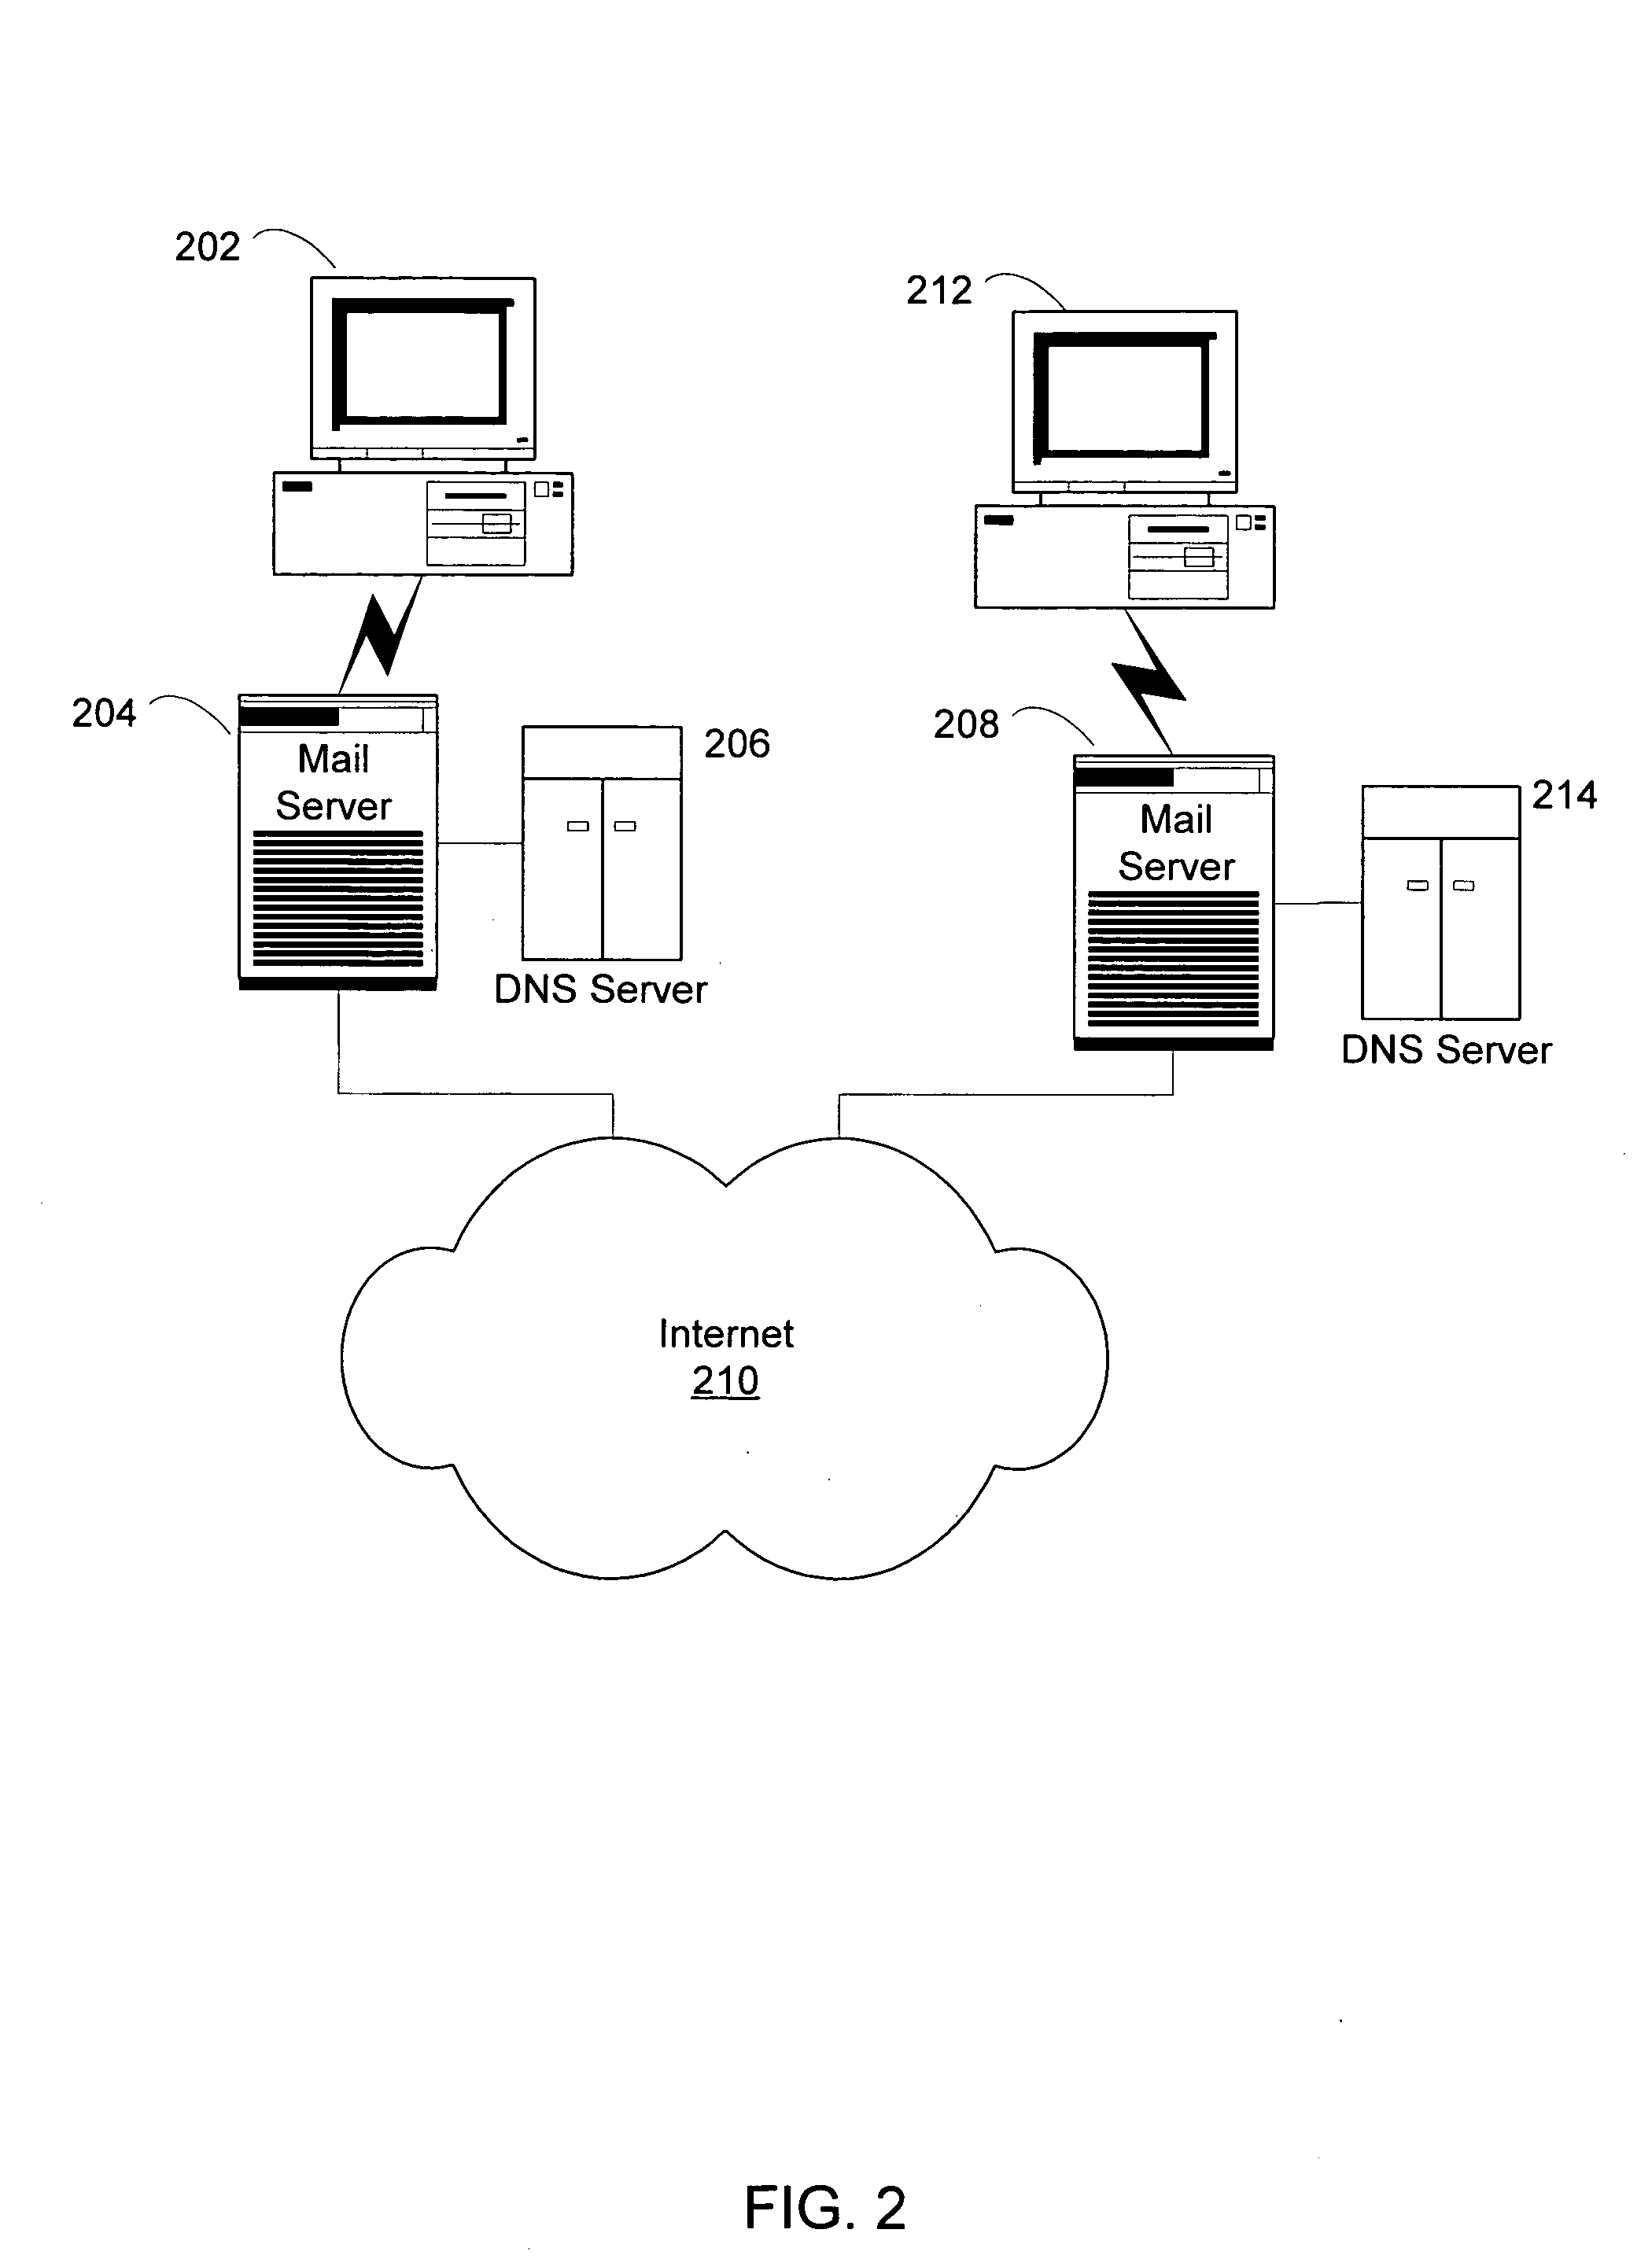 Authenticated exchange of public information using electronic mail